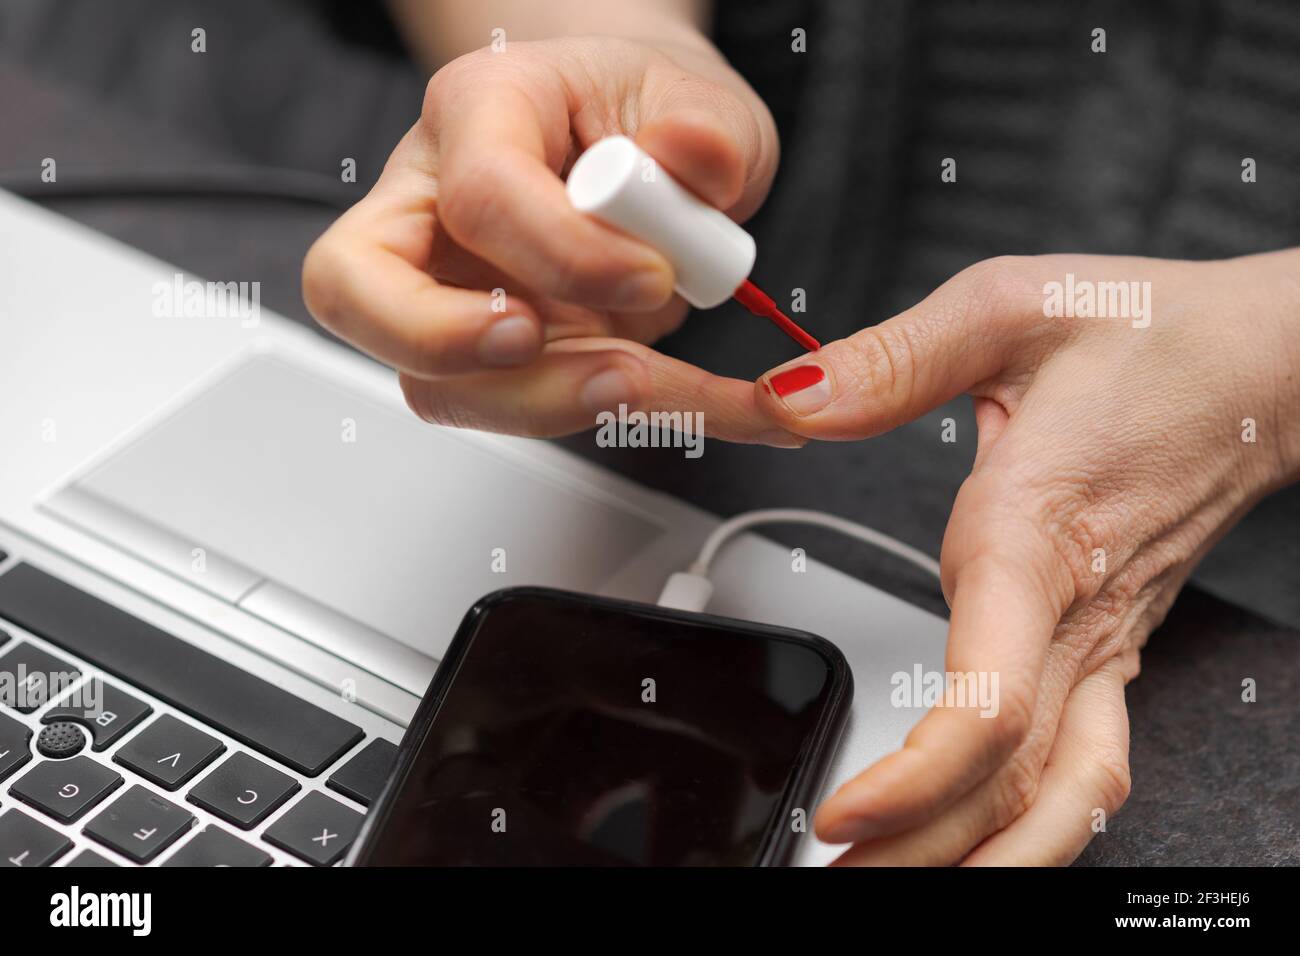 Female or male hands applying red nail polish on fingernails as stress relieve from work at desk in home office near laptop computer and smartphone Stock Photo